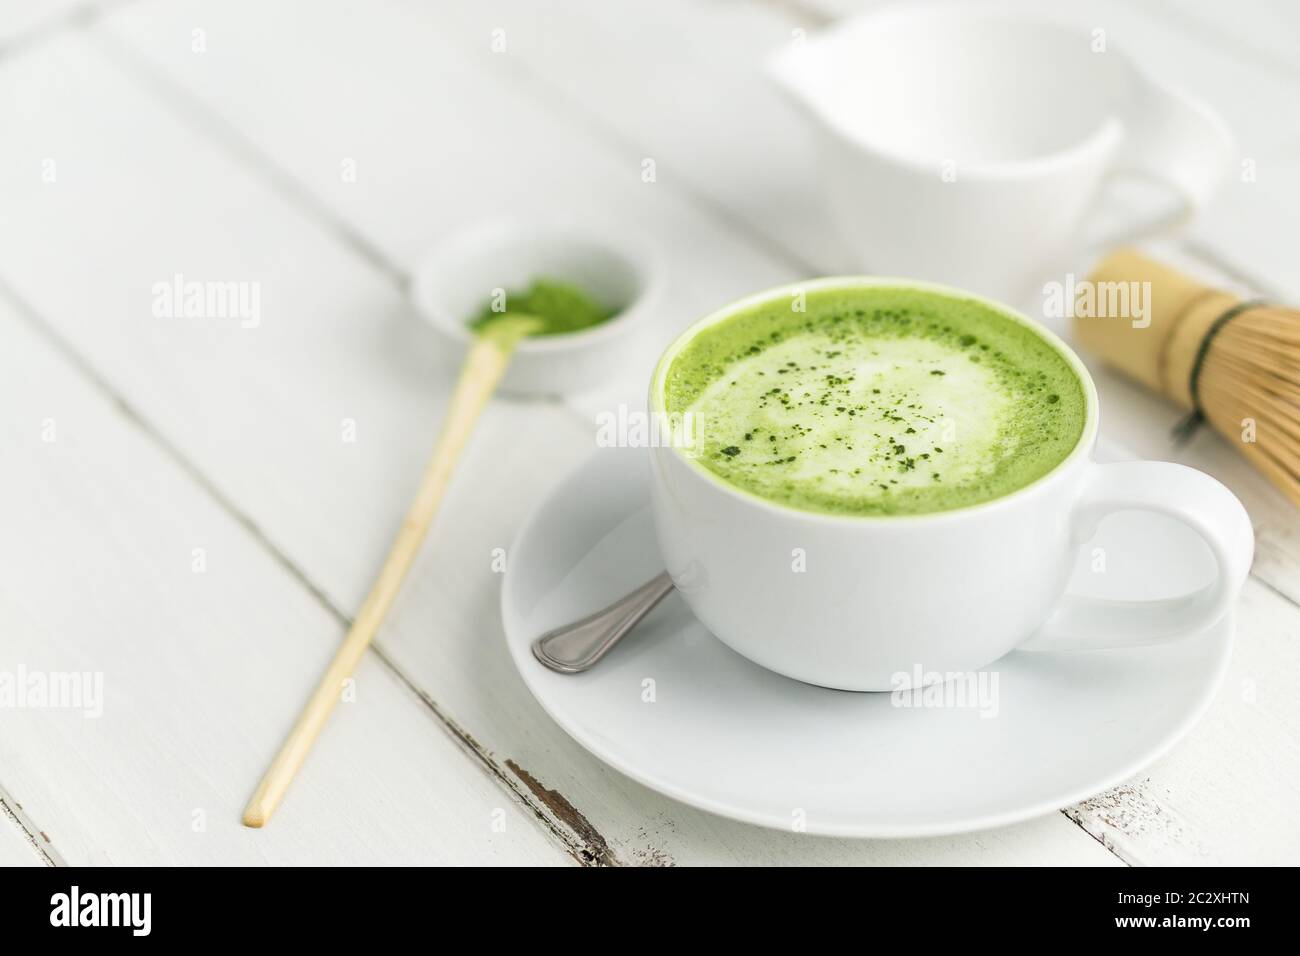 Green tea matcha latte cup on white background. This latte is a delicious way to enjoy the energy boost & healthy benefits of matcha. Stock Photo